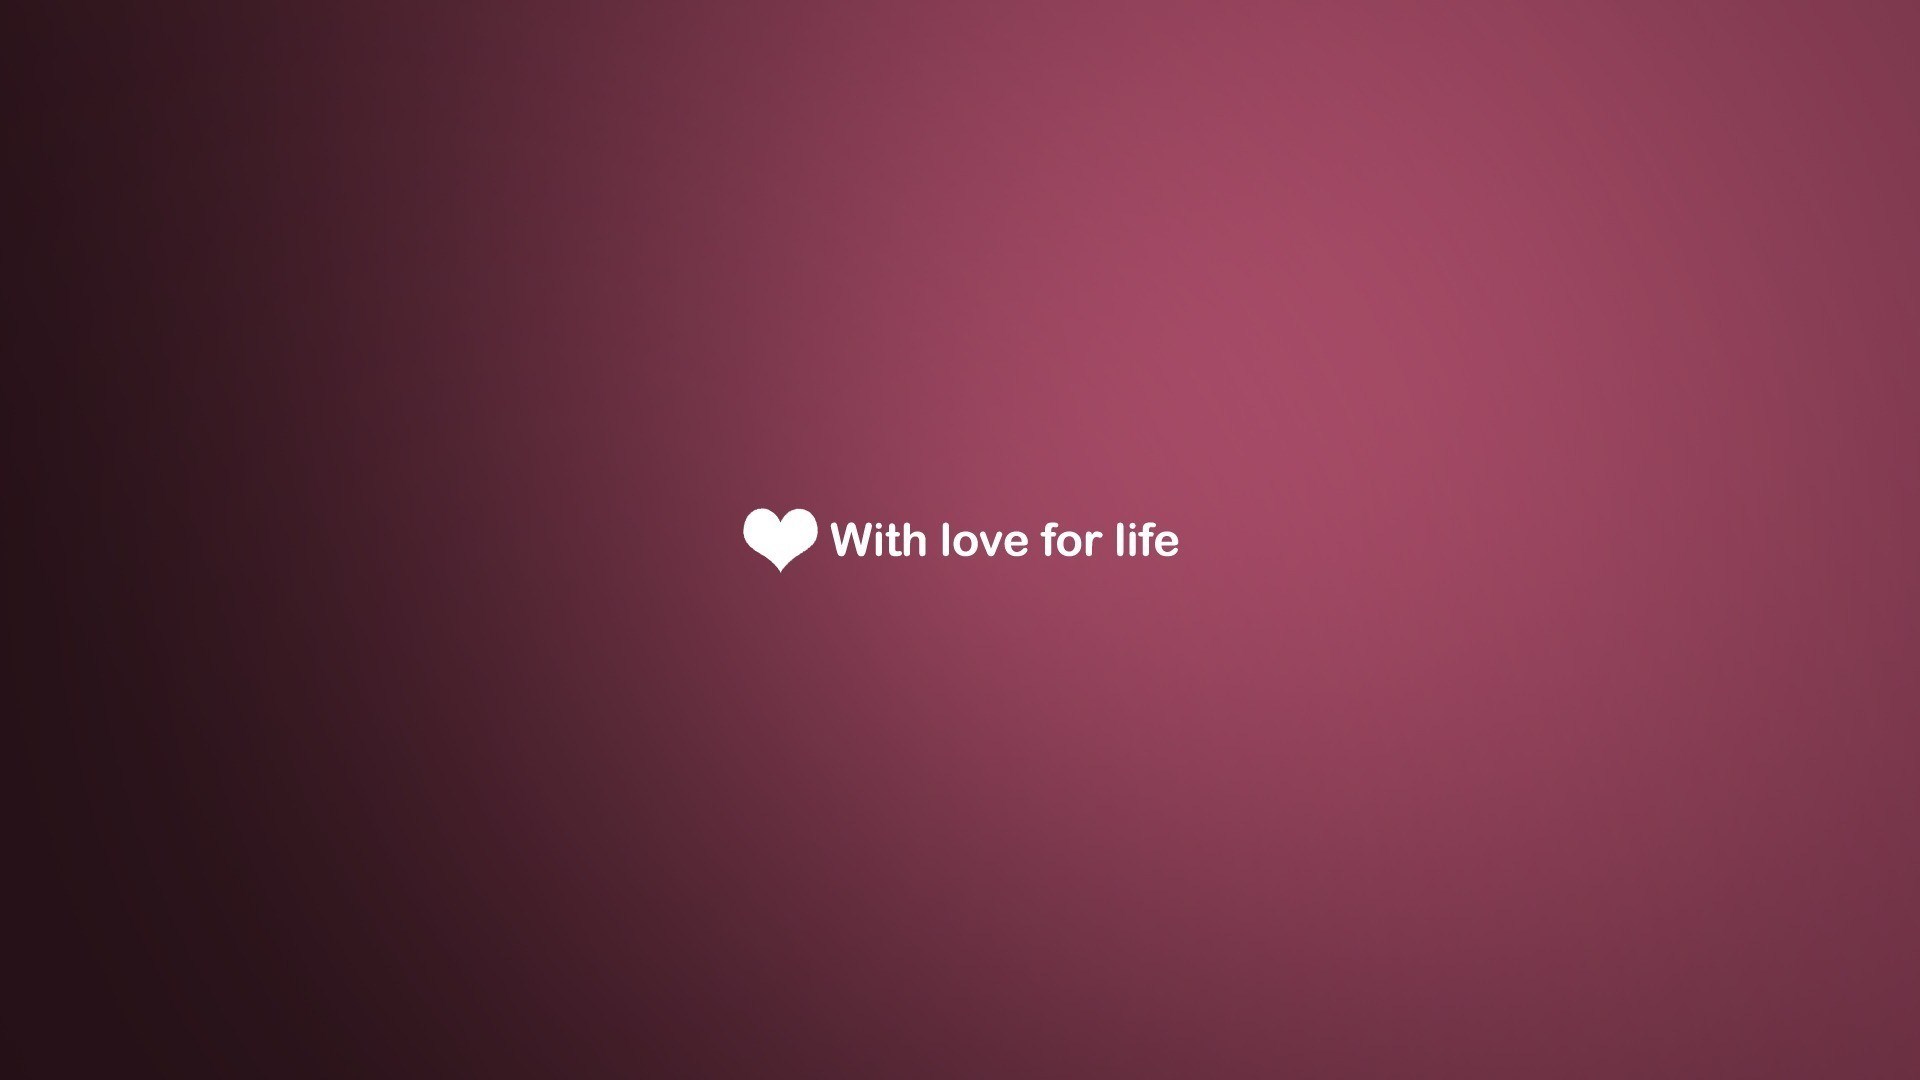 love life wallpaper,text,violet,pink,red,maroon